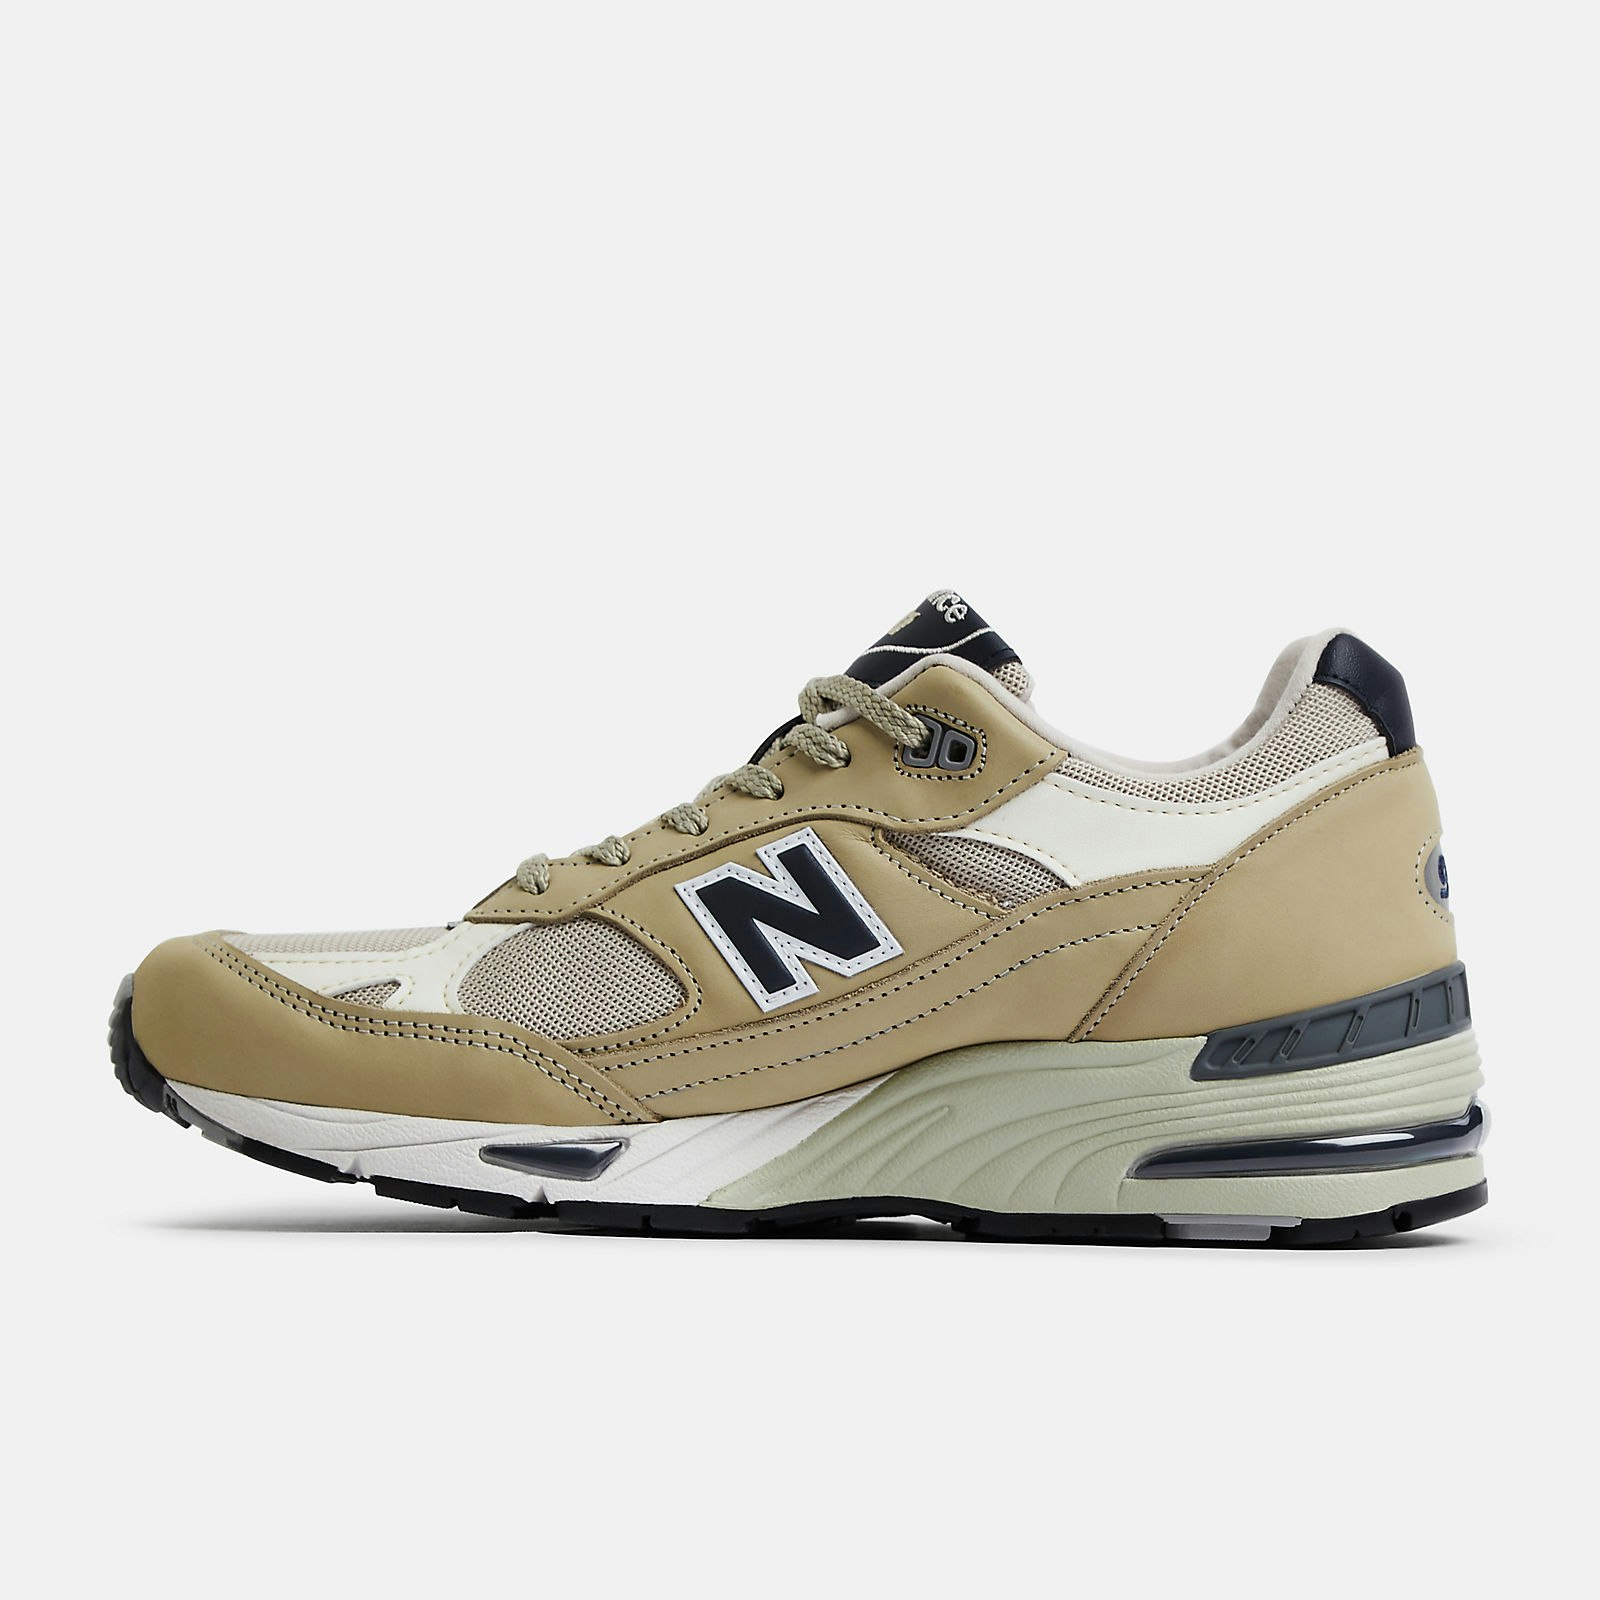 New Balance 991 "Made in UK" (Brown Rice)